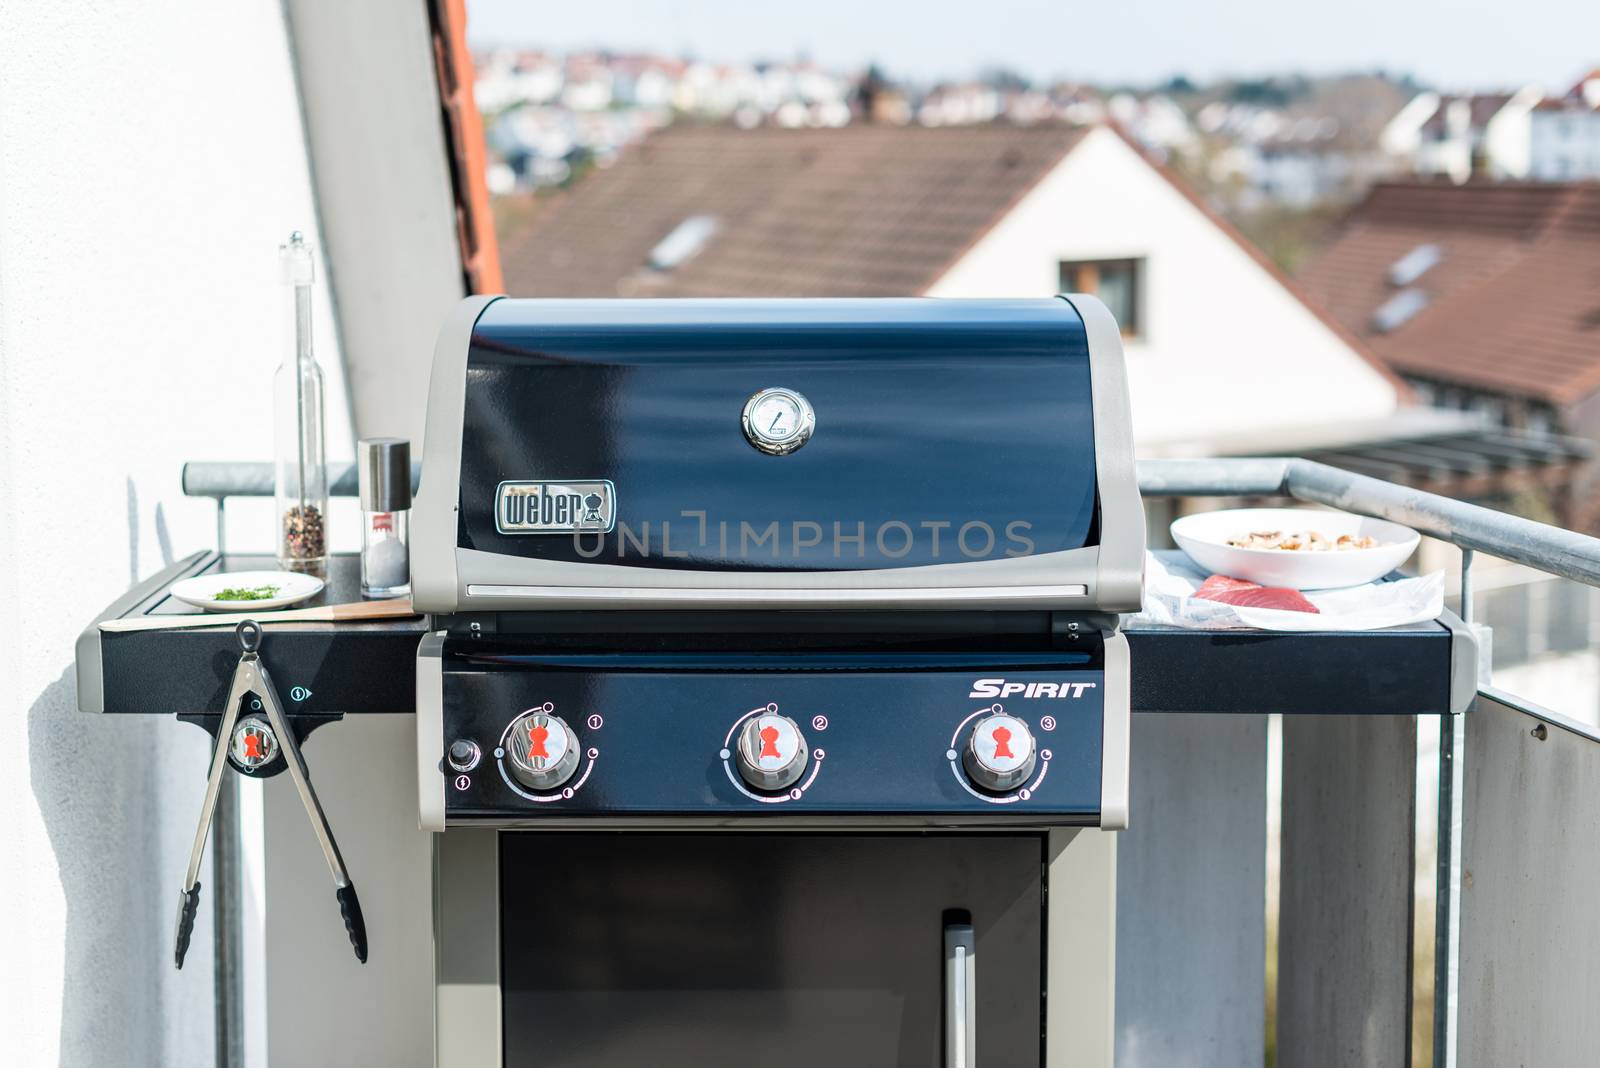 NEUHAUSEN, GERMANY - MARCH 27, 2014: A brand new Weber BBQ Gas Grill Spirit S320 black edition (model 2014) is waiting for its first use on March 27, 2014 in Neuhausen (near Stuttgart), Germany. The lid of the grill is closed, some utensils like BBQ tongs, a spatula, pepper and salt plus some herbs are placed on one of its sideboards. The other one is carrying a red tuna steak and some mushrooms on a plate.